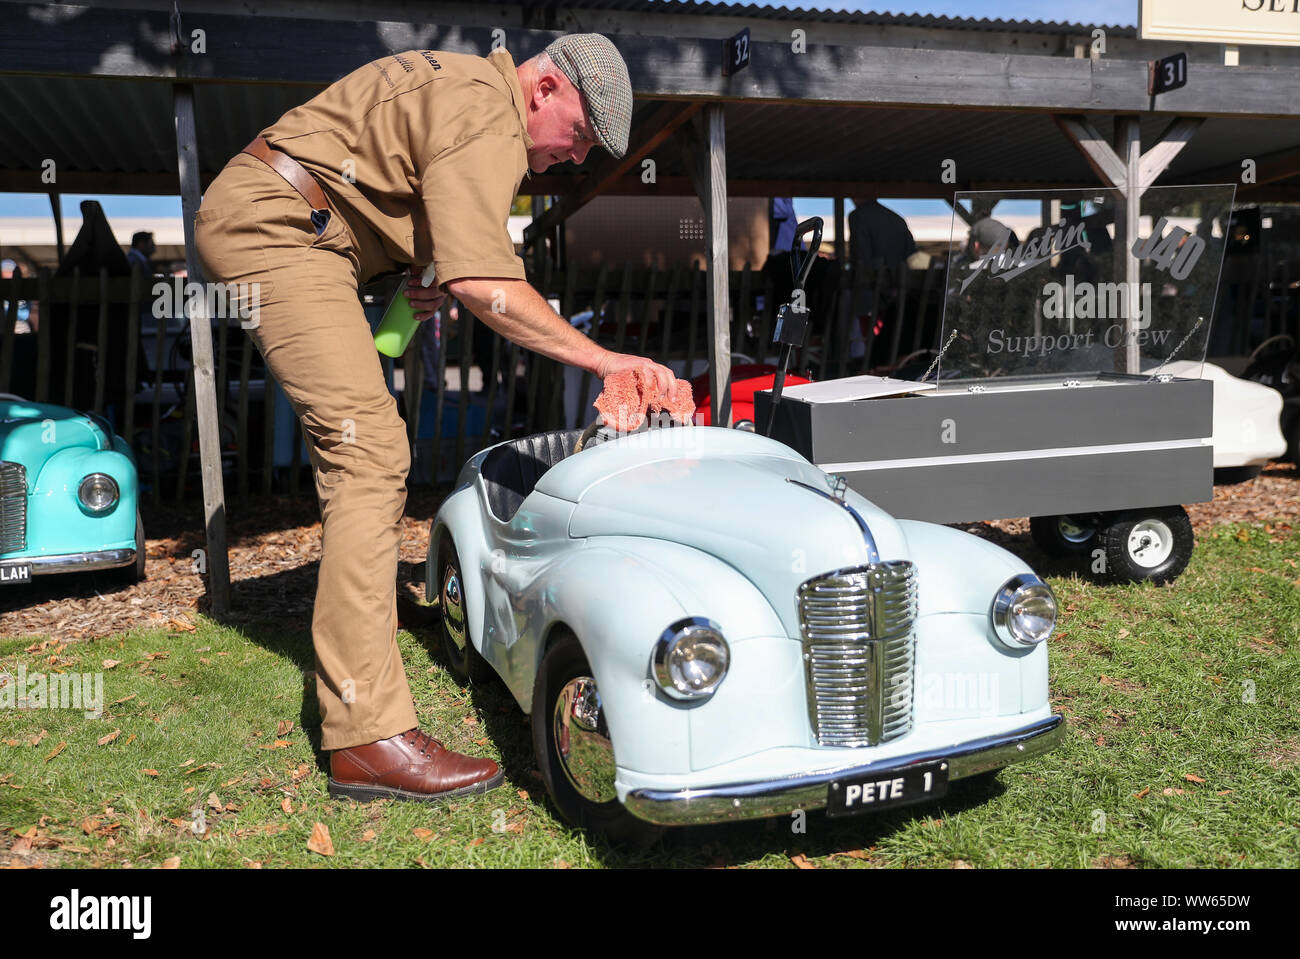 A valet polishes an Austin J40 pedal car during day one of the Goodwood Revival at the Goodwood Motor Circuit, in Chichester. Stock Photo